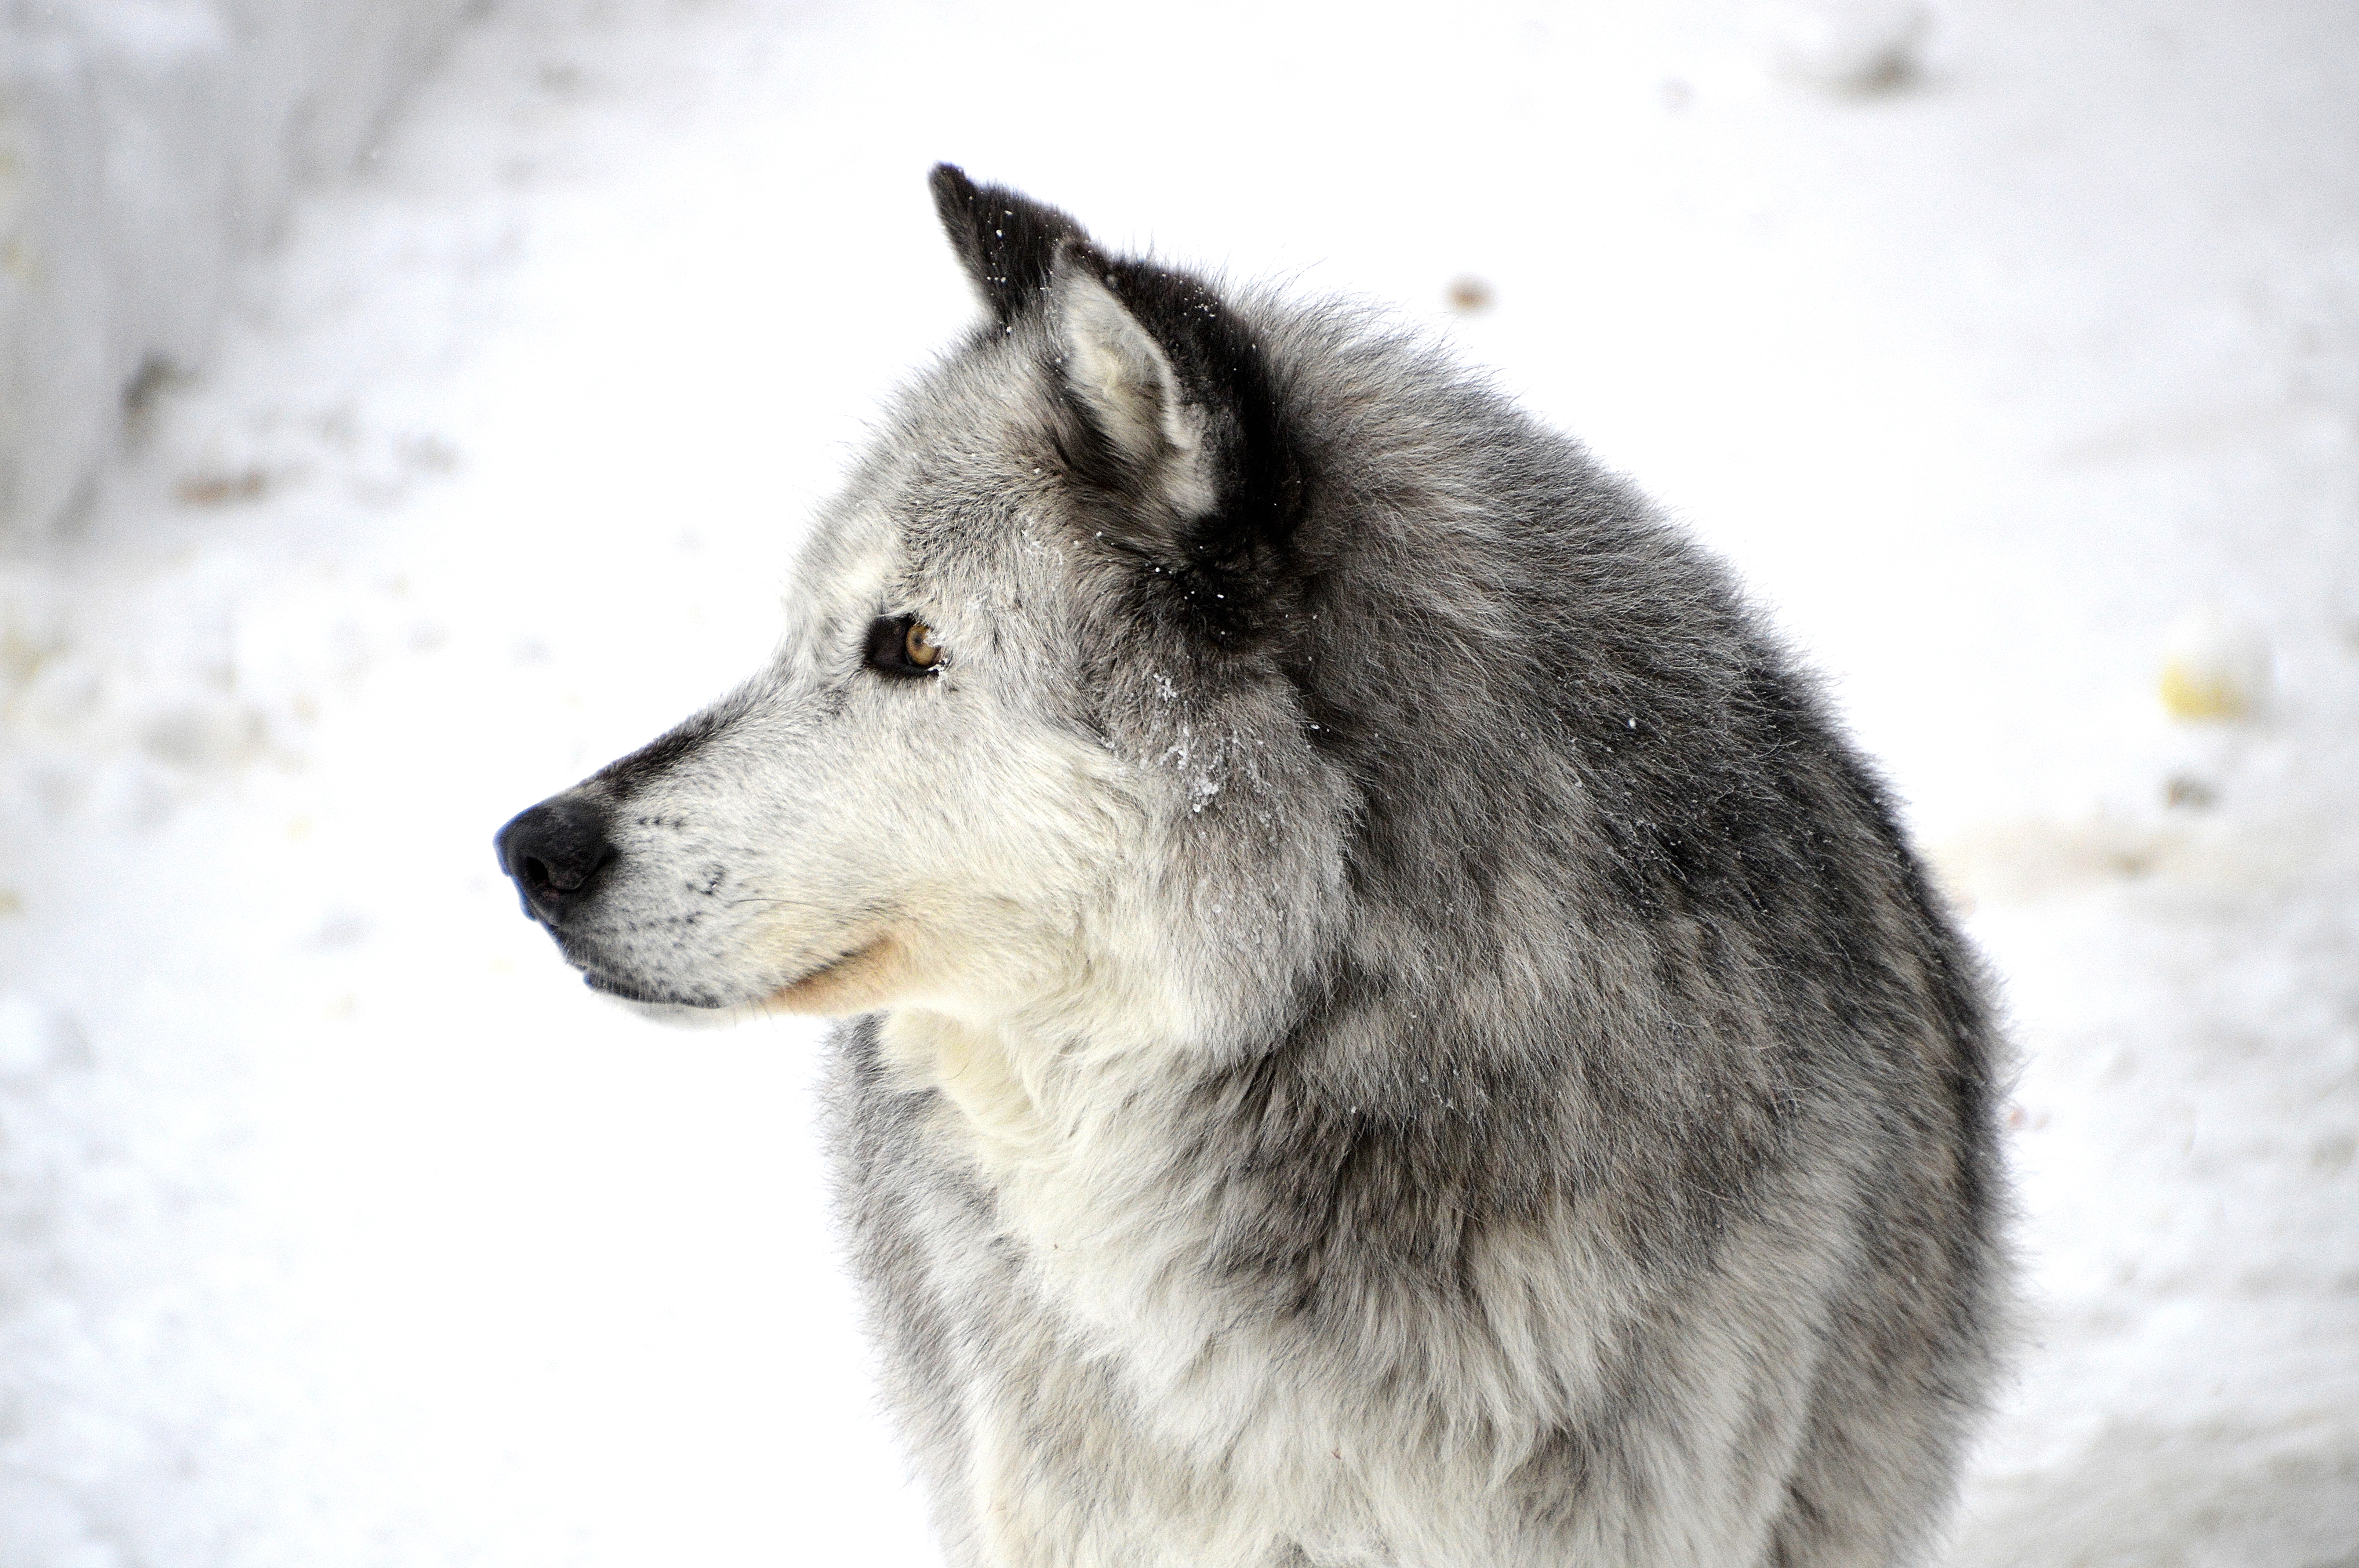 60667 download wallpaper animals, snow, dog, profile screensavers and pictures for free